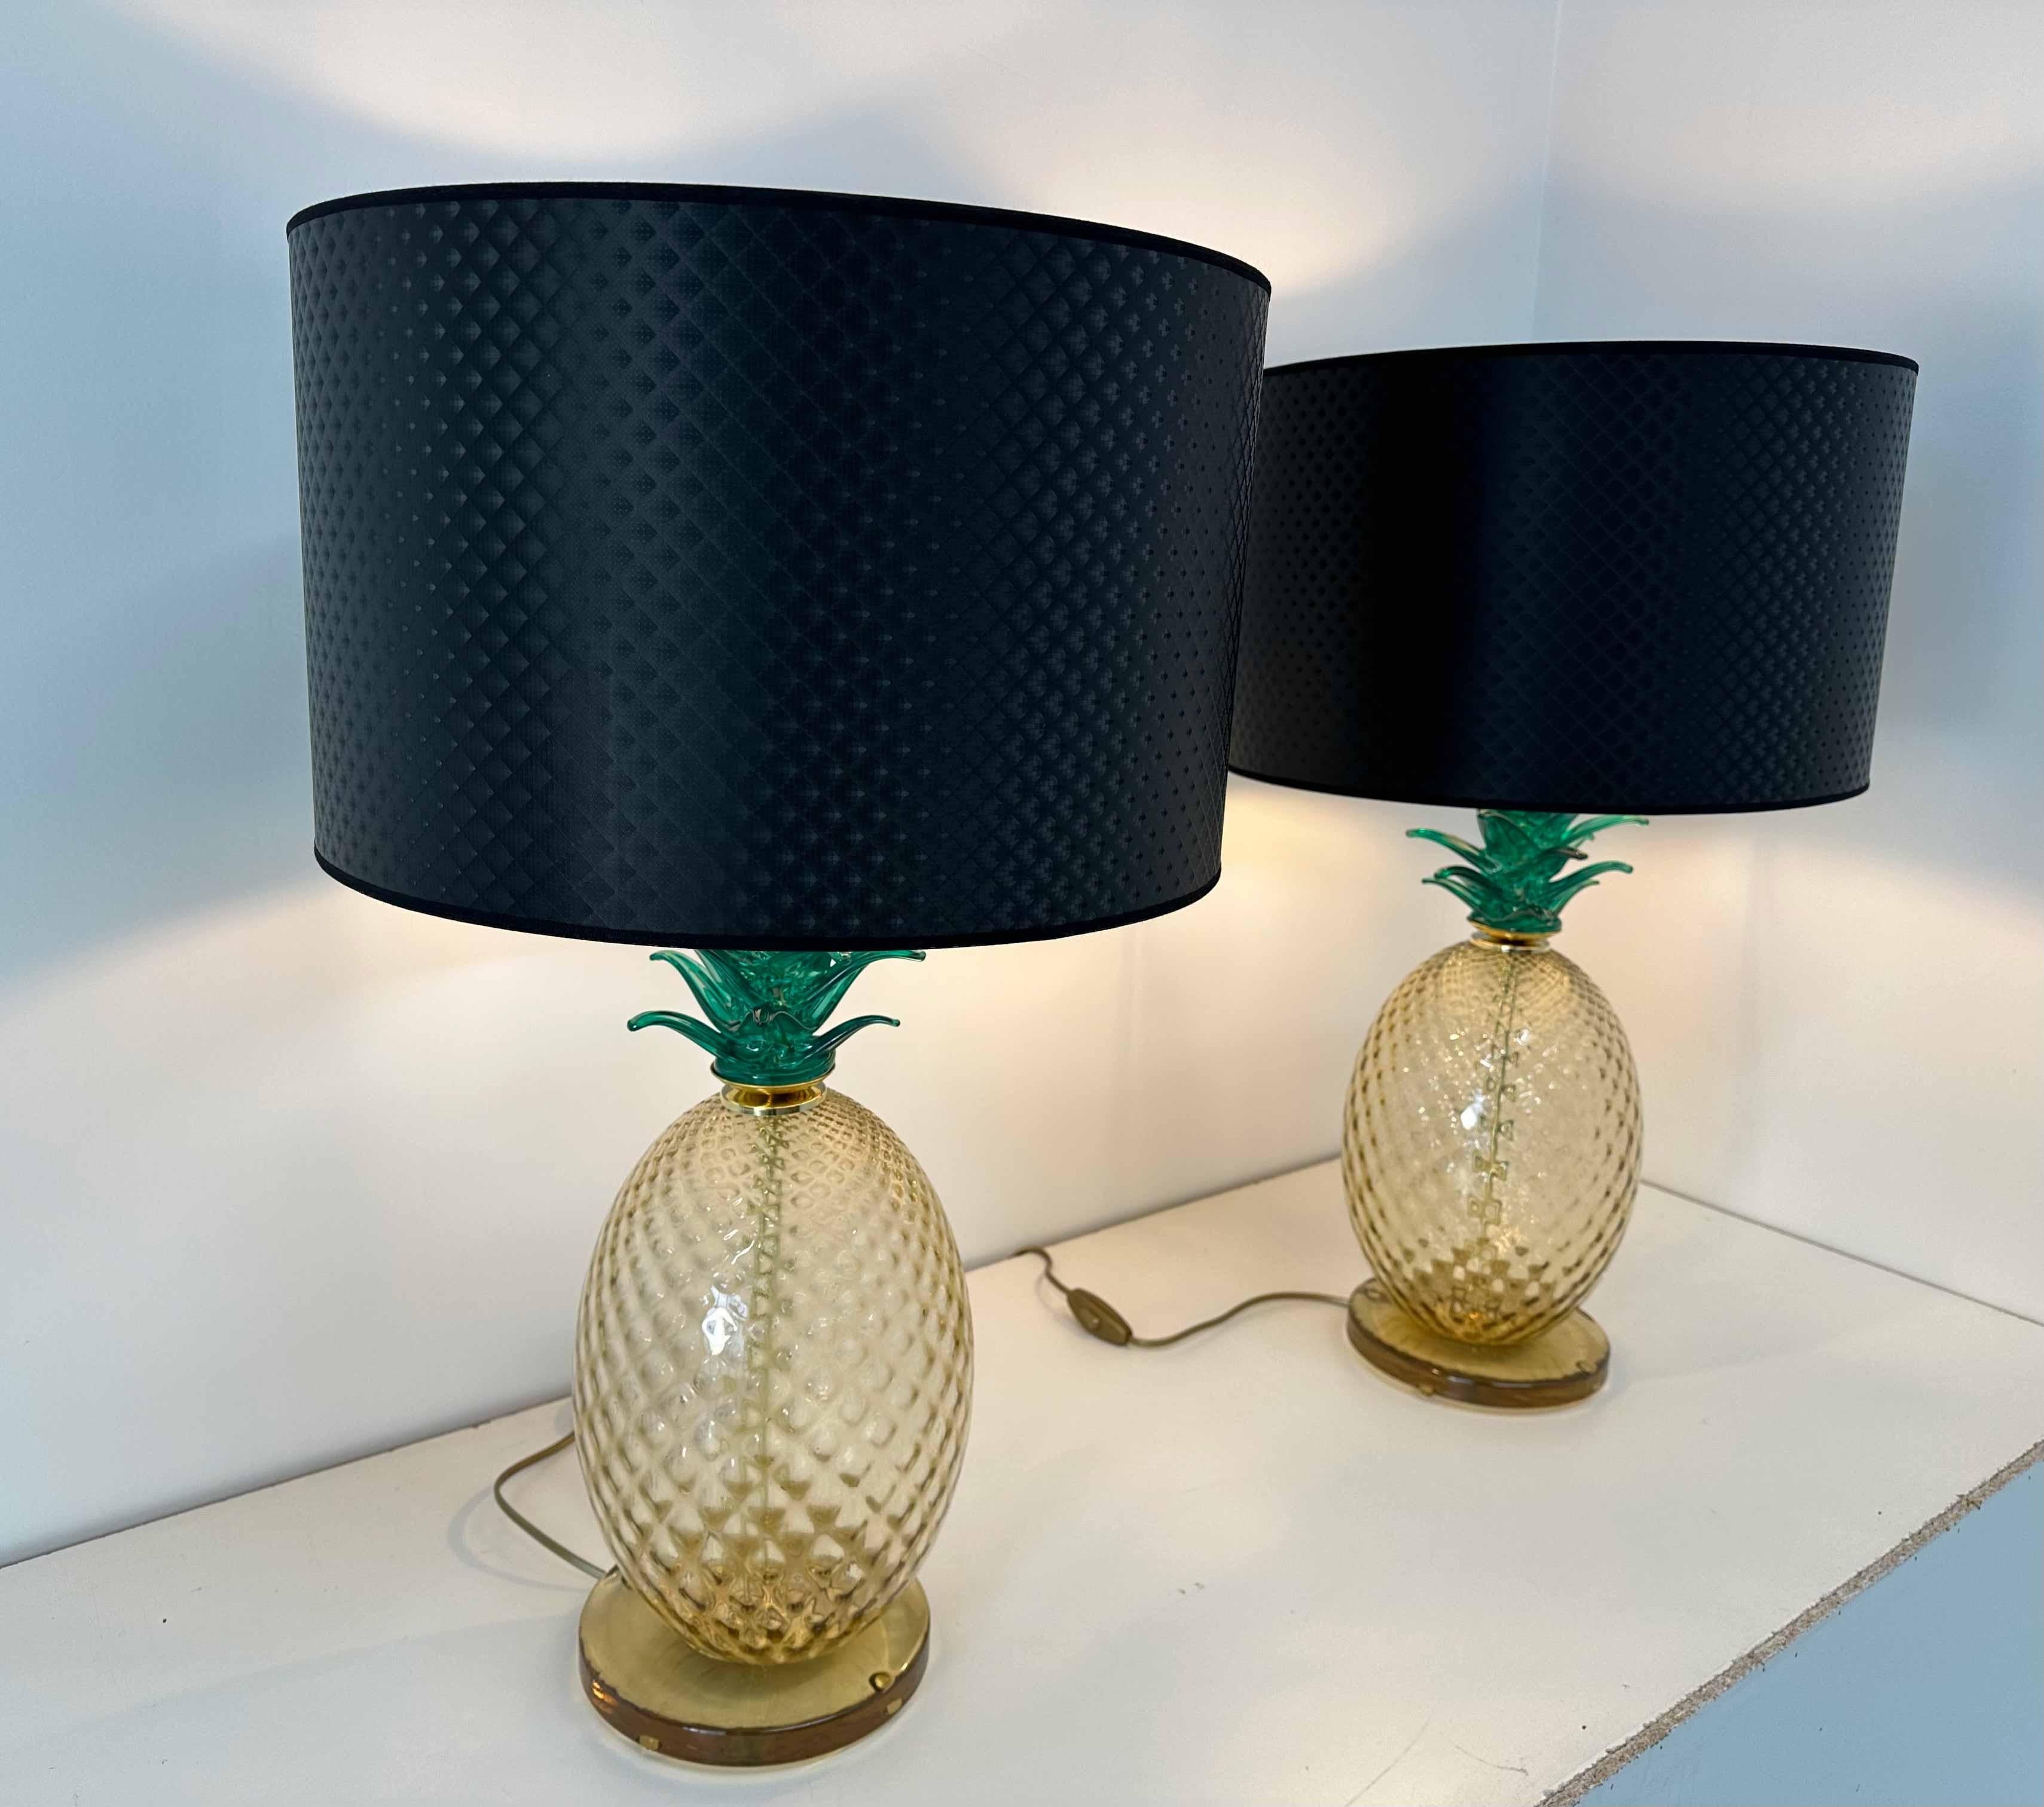 Pair of Italian Art Deco Pineapple Murano Glass Lamps with Lampshades  For Sale 1